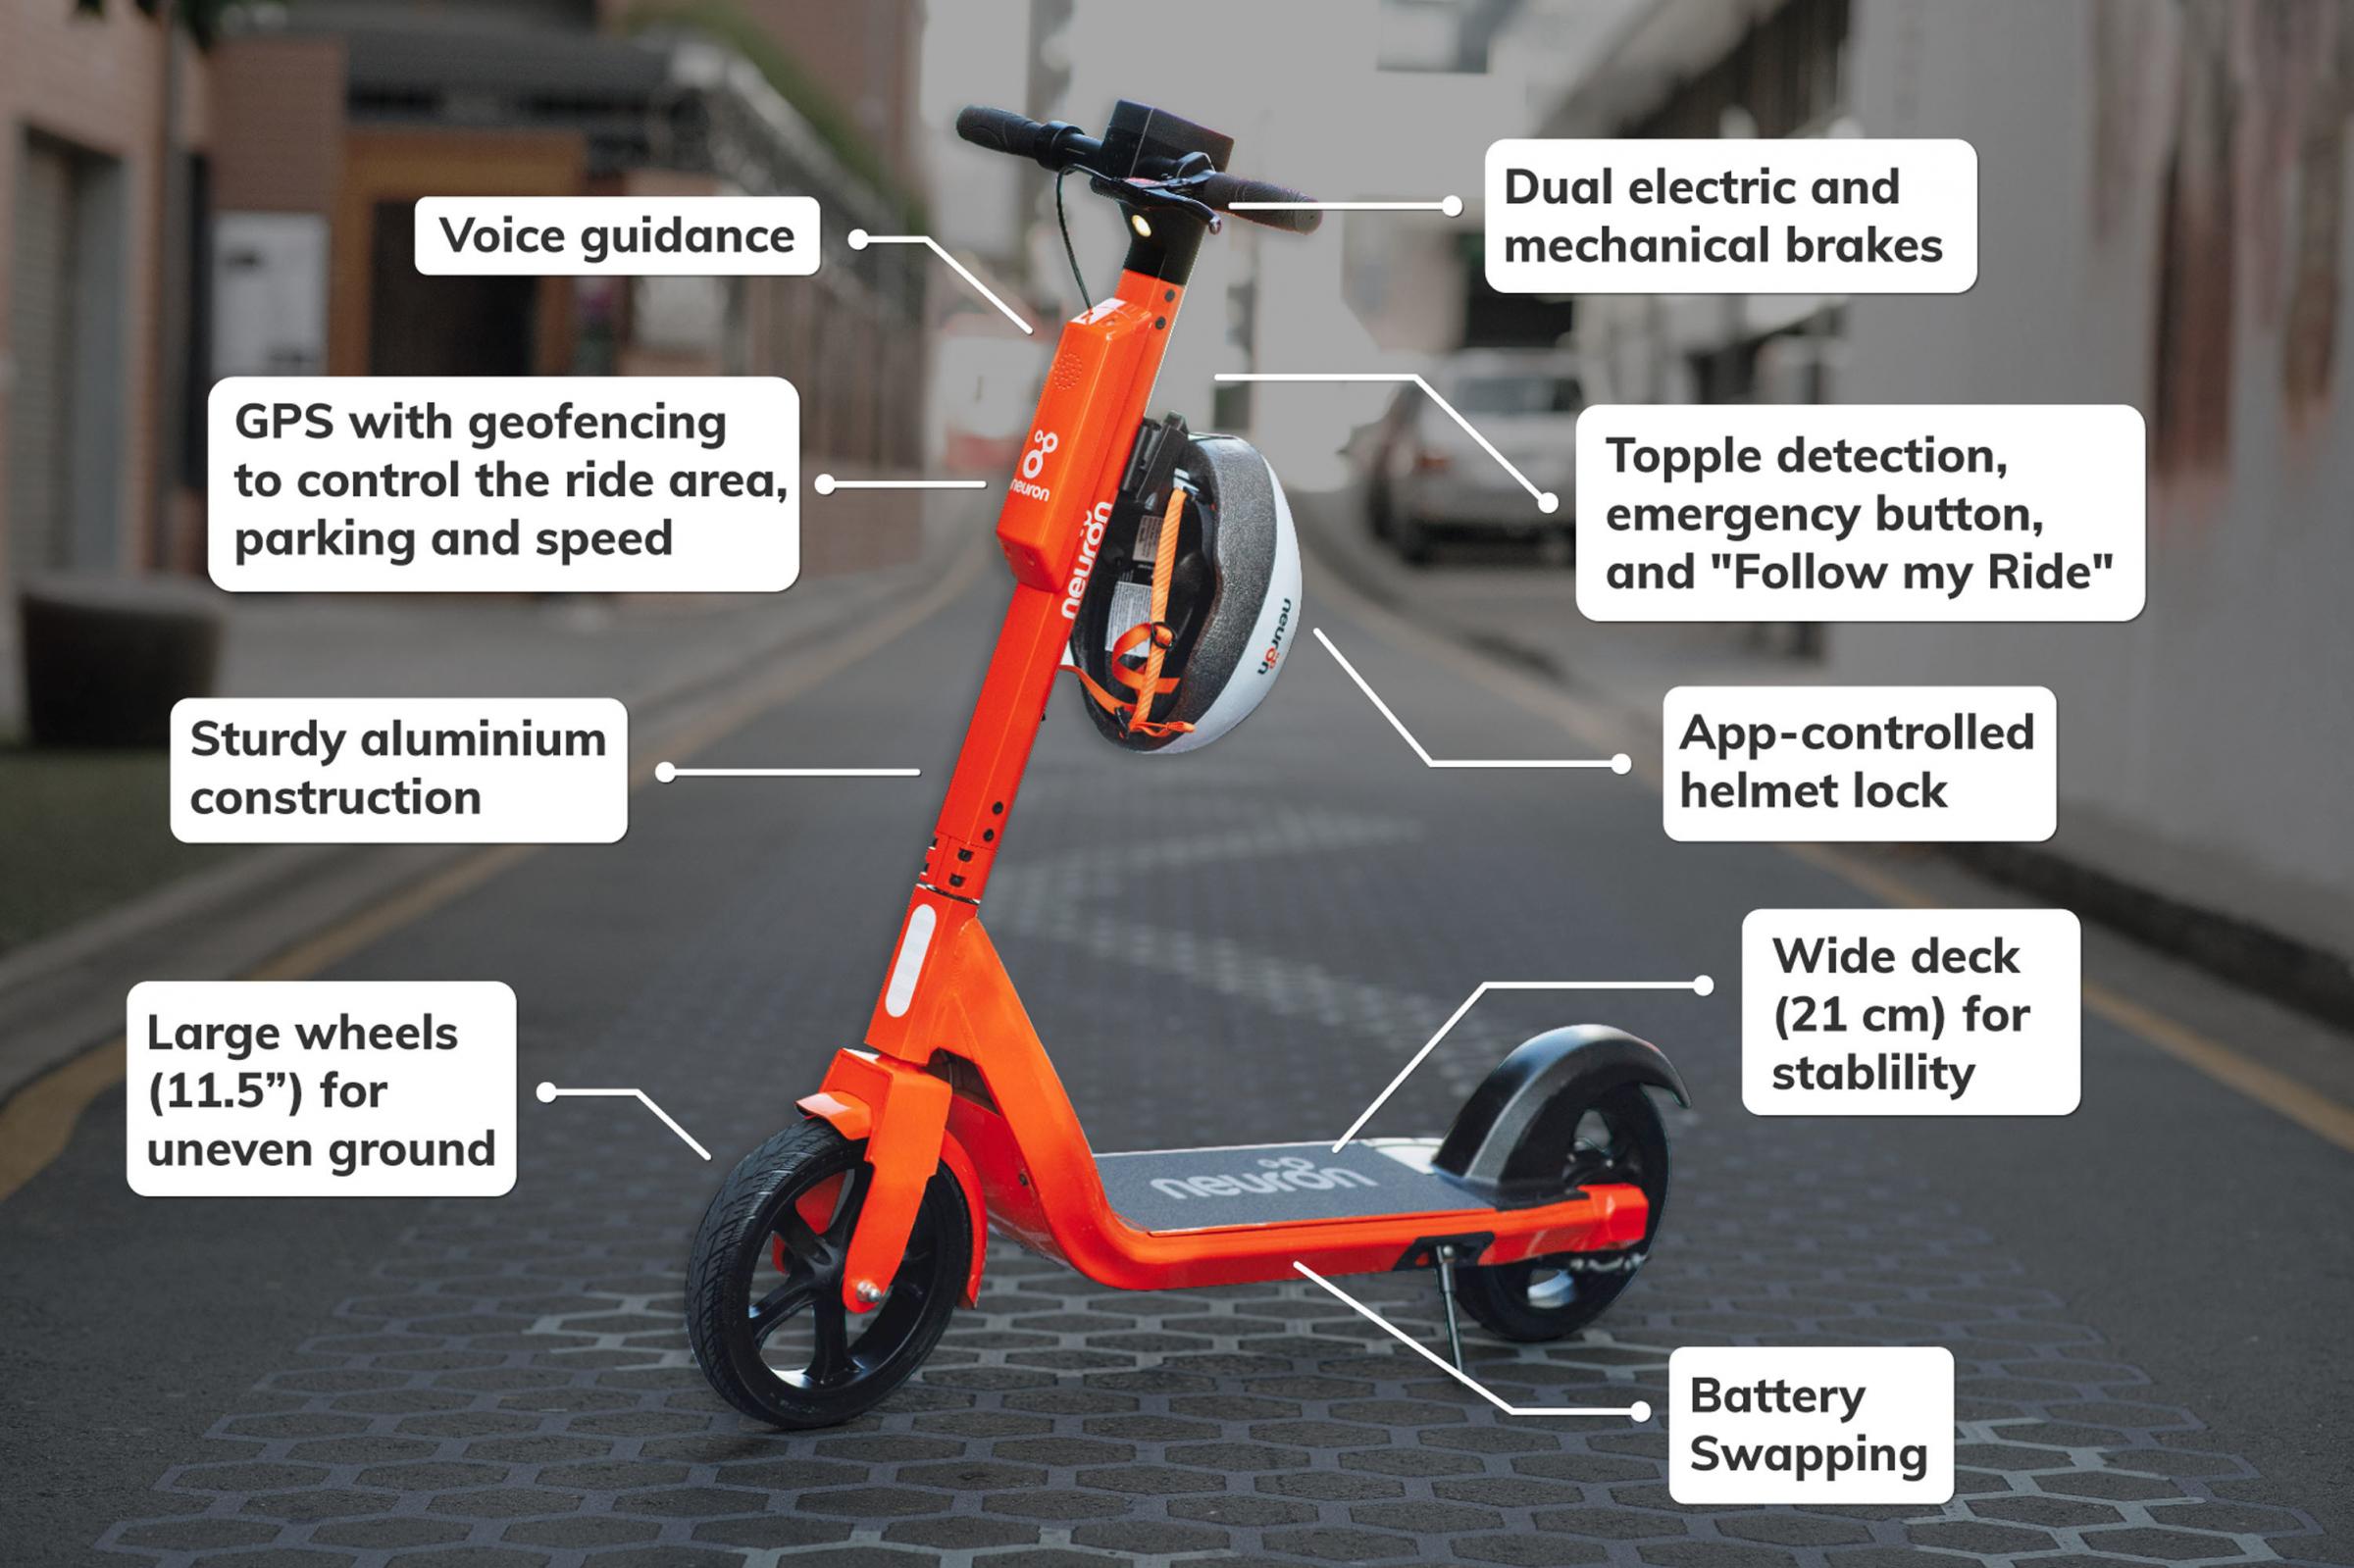 E-scooter rental company ready to roll service out in Sunderland | The Echo